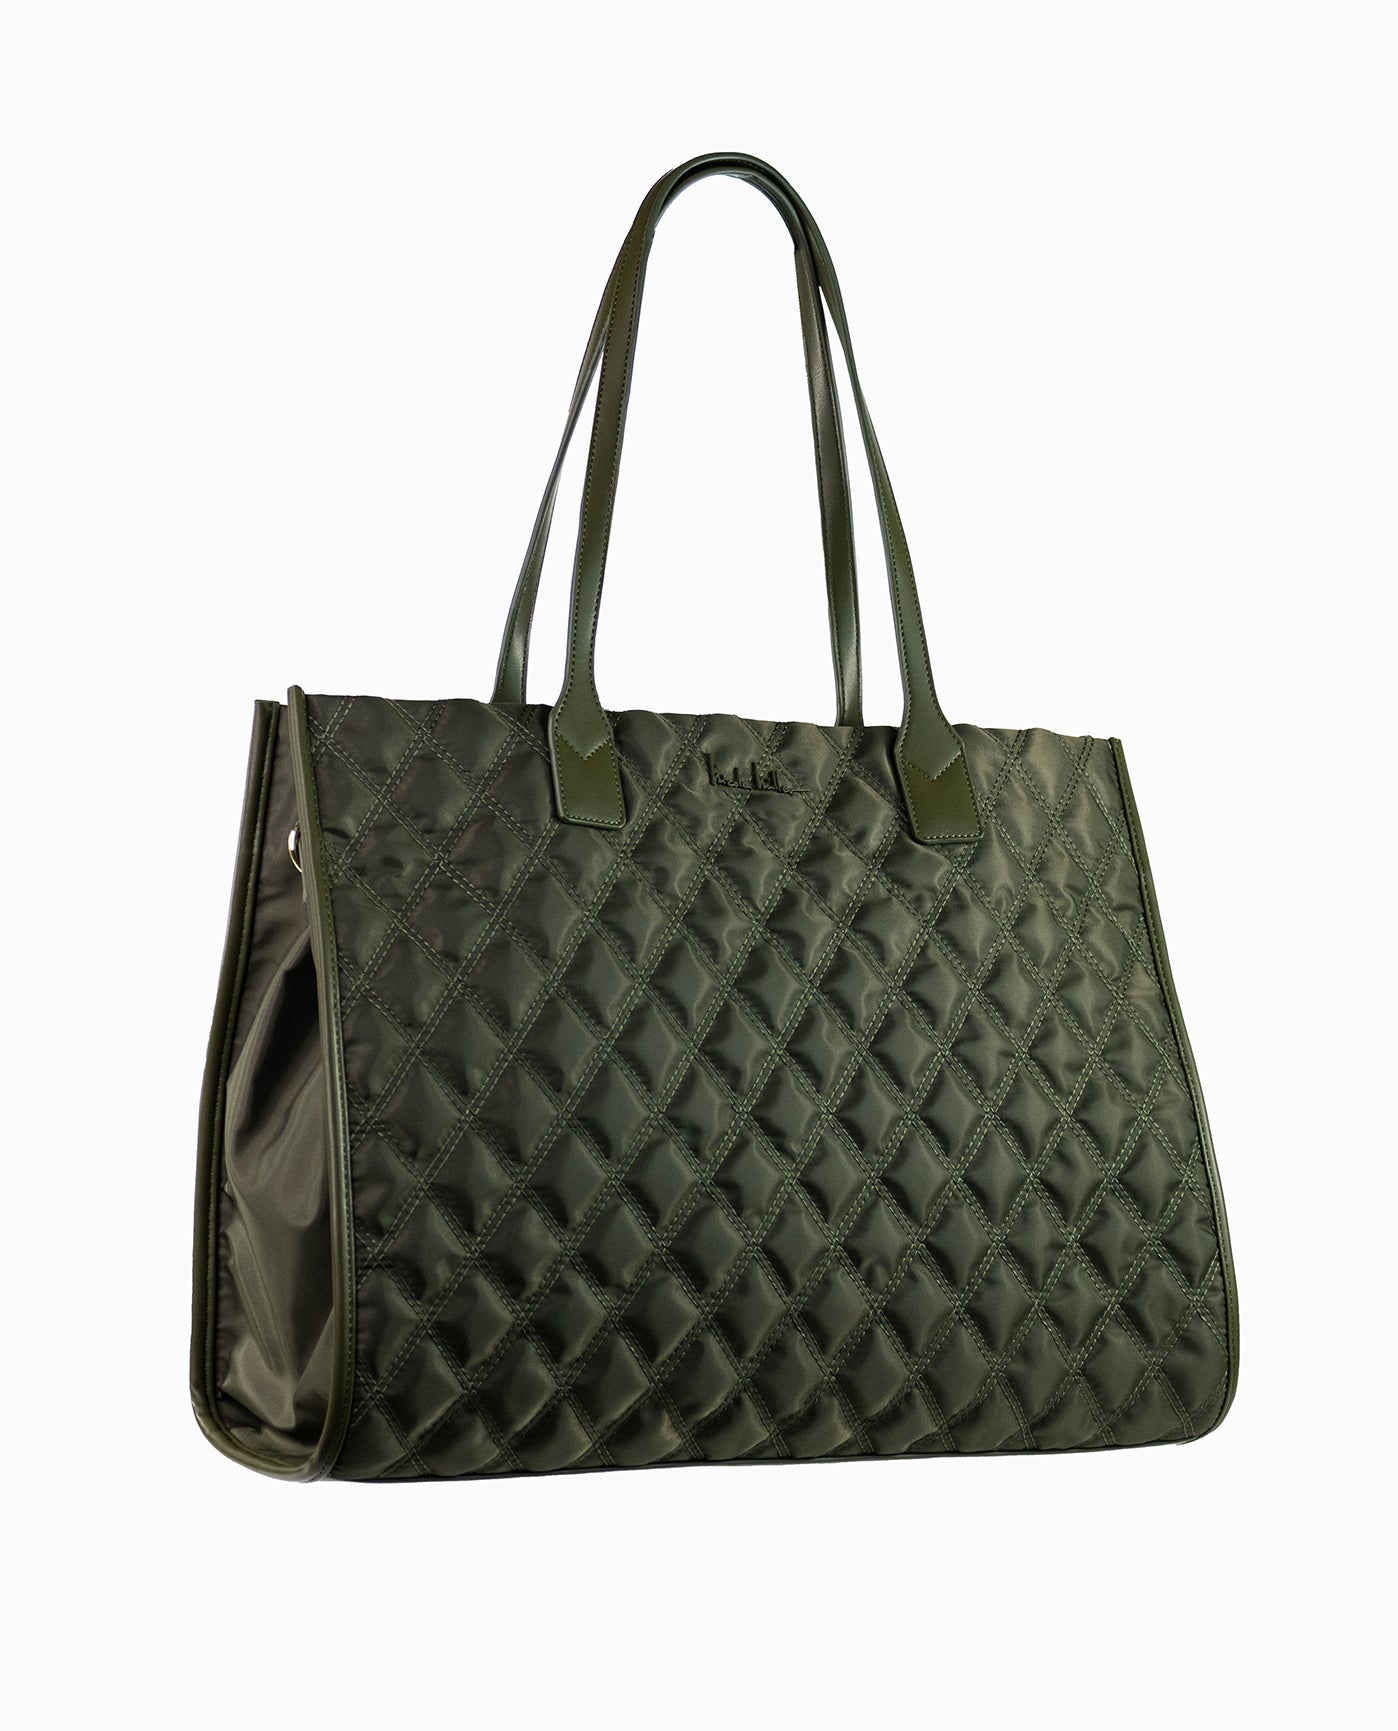 Nicole Miller Quilted Nylon Tote Bag